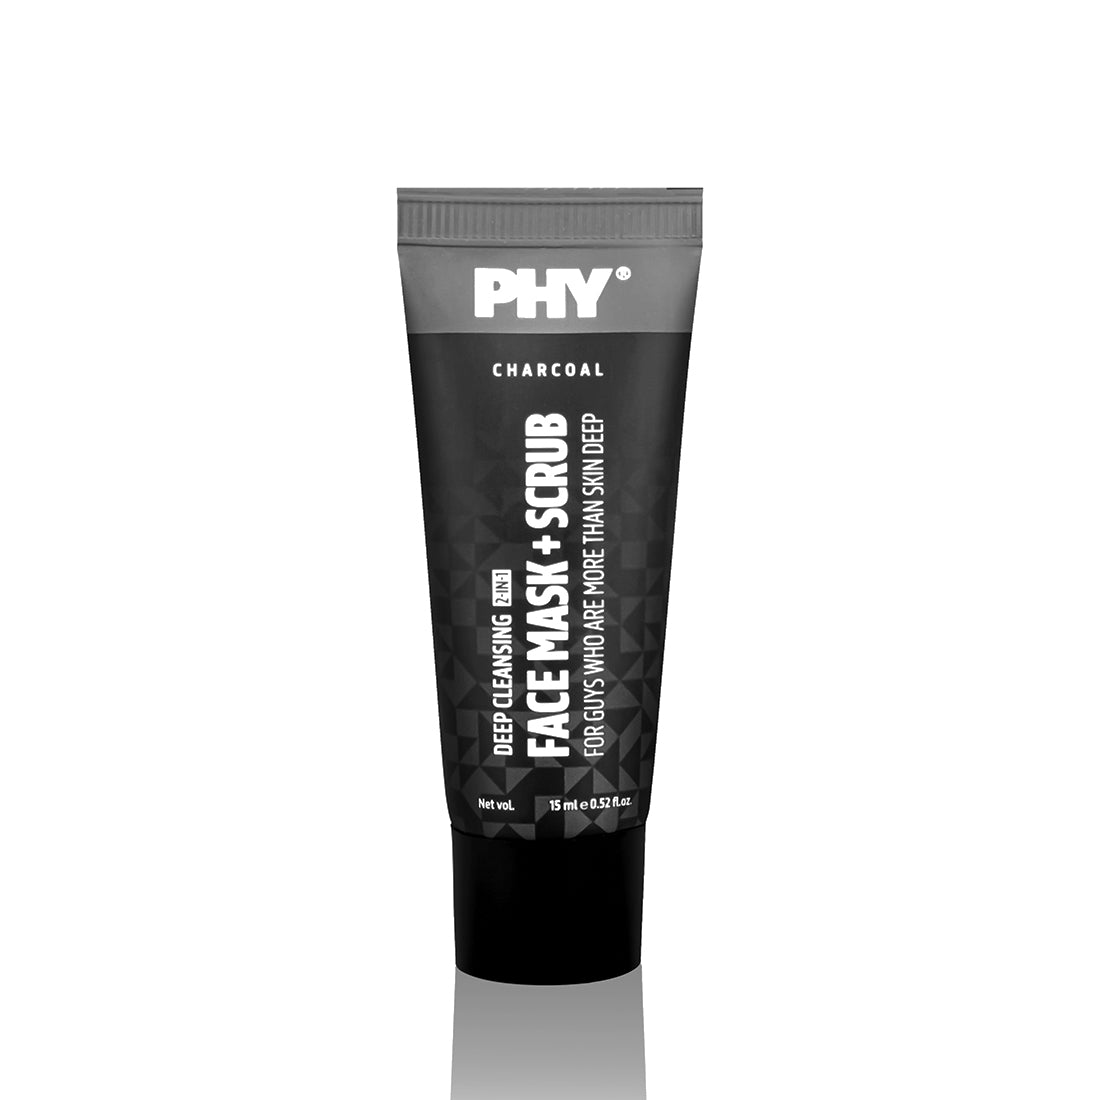 Phy 2-in-1 Charcoal Face Mask + Scrub